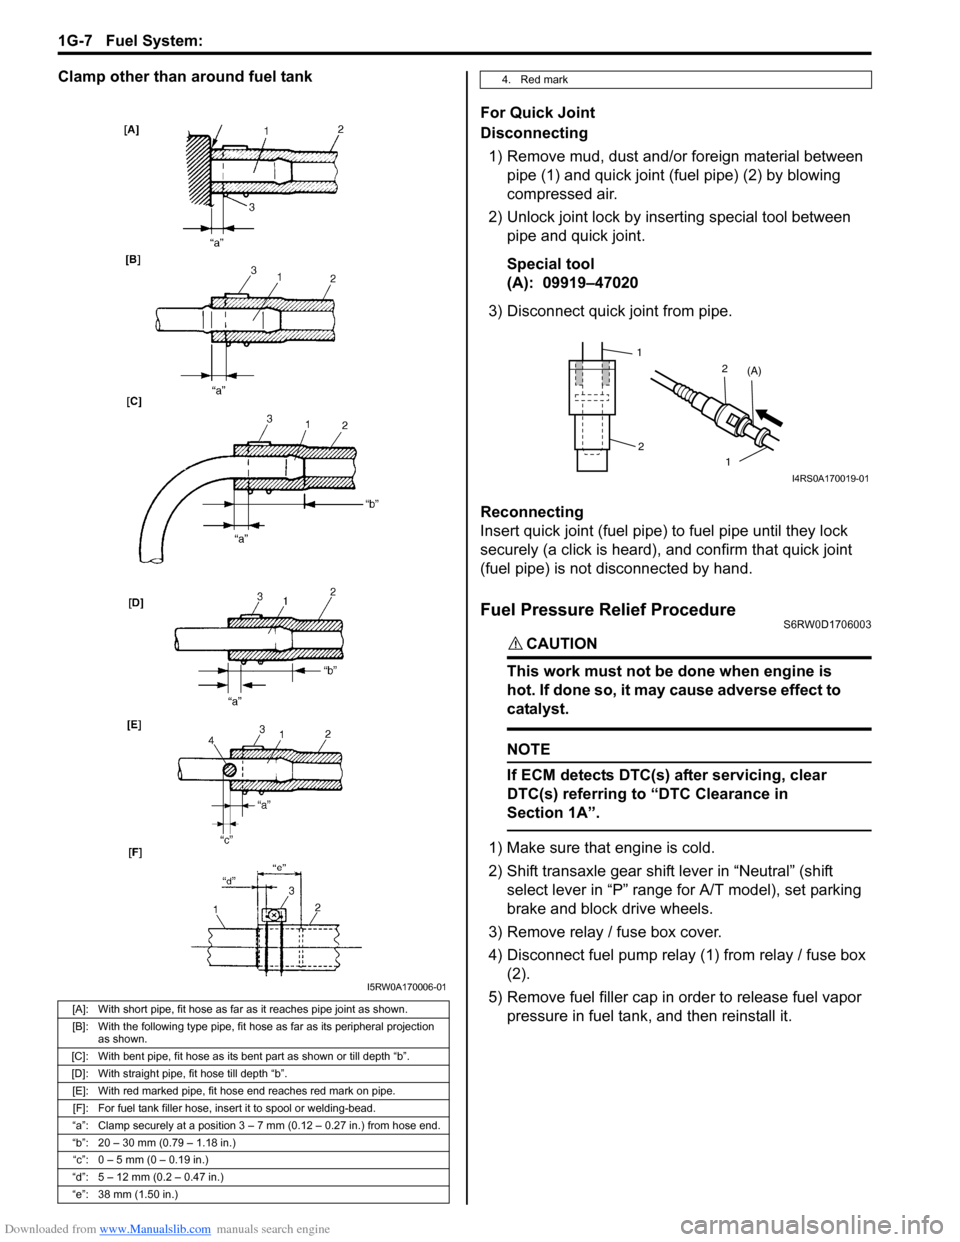 SUZUKI SX4 2006 1.G Service Workshop Manual Downloaded from www.Manualslib.com manuals search engine 1G-7 Fuel System: 
Clamp other than around fuel tank 
For Quick Joint
Disconnecting
1) Remove mud, dust and/or foreign material between 
pipe (